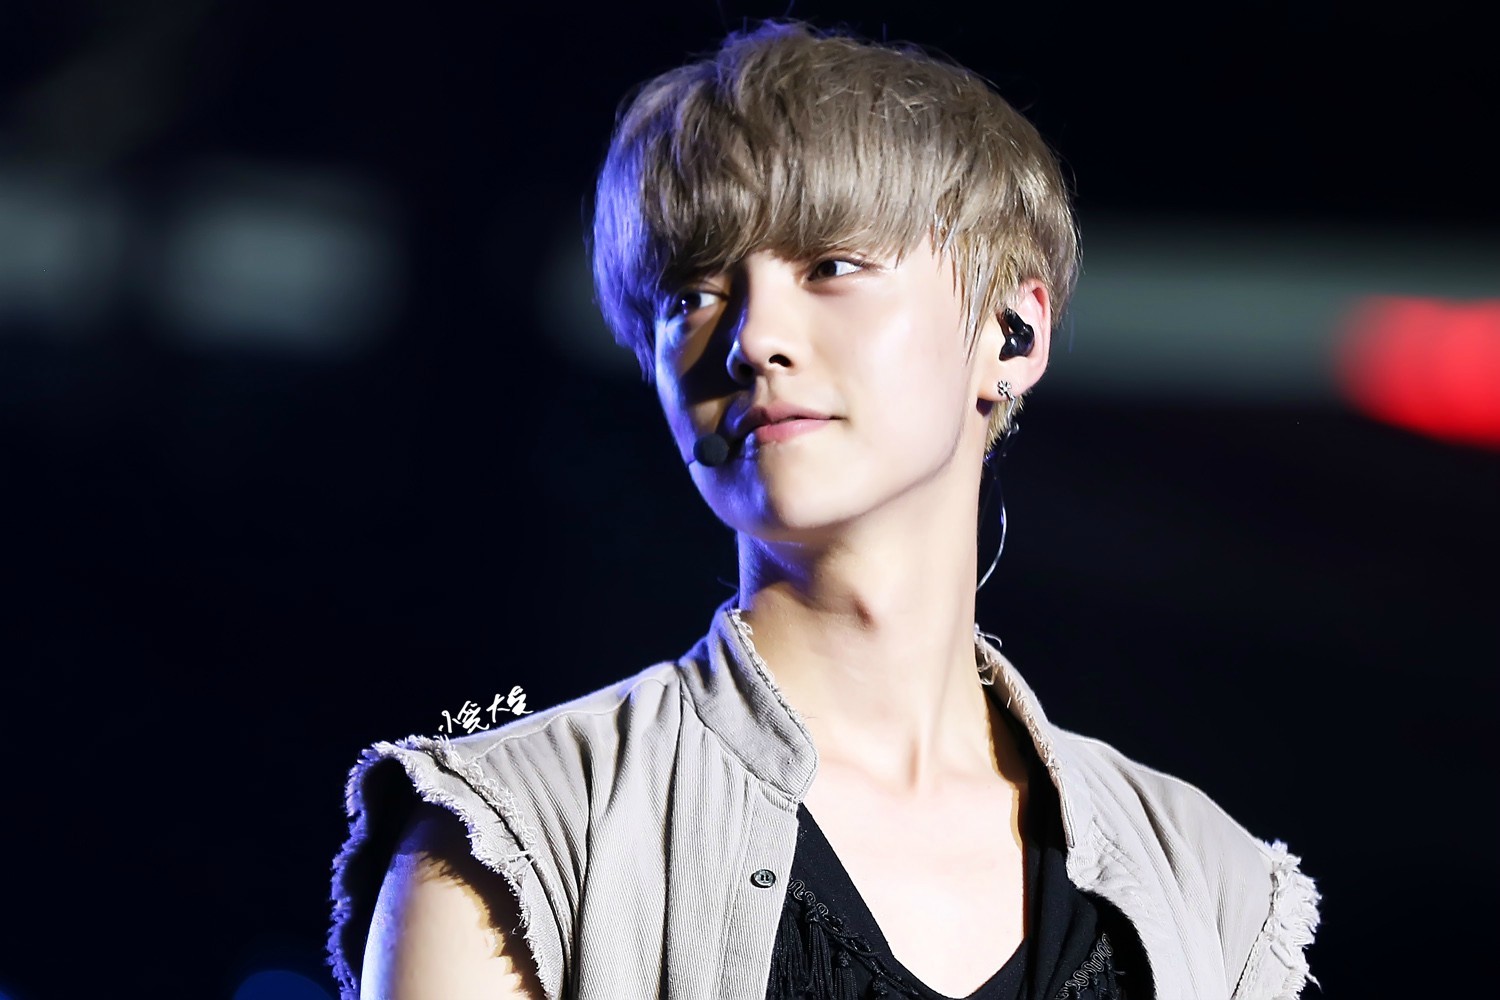 [FANTAKEN] 140727 EXO Concert "The Lost Planet" in Changsha [116P] 6fa78c66gw1eismx5a5zbj215o0rs792